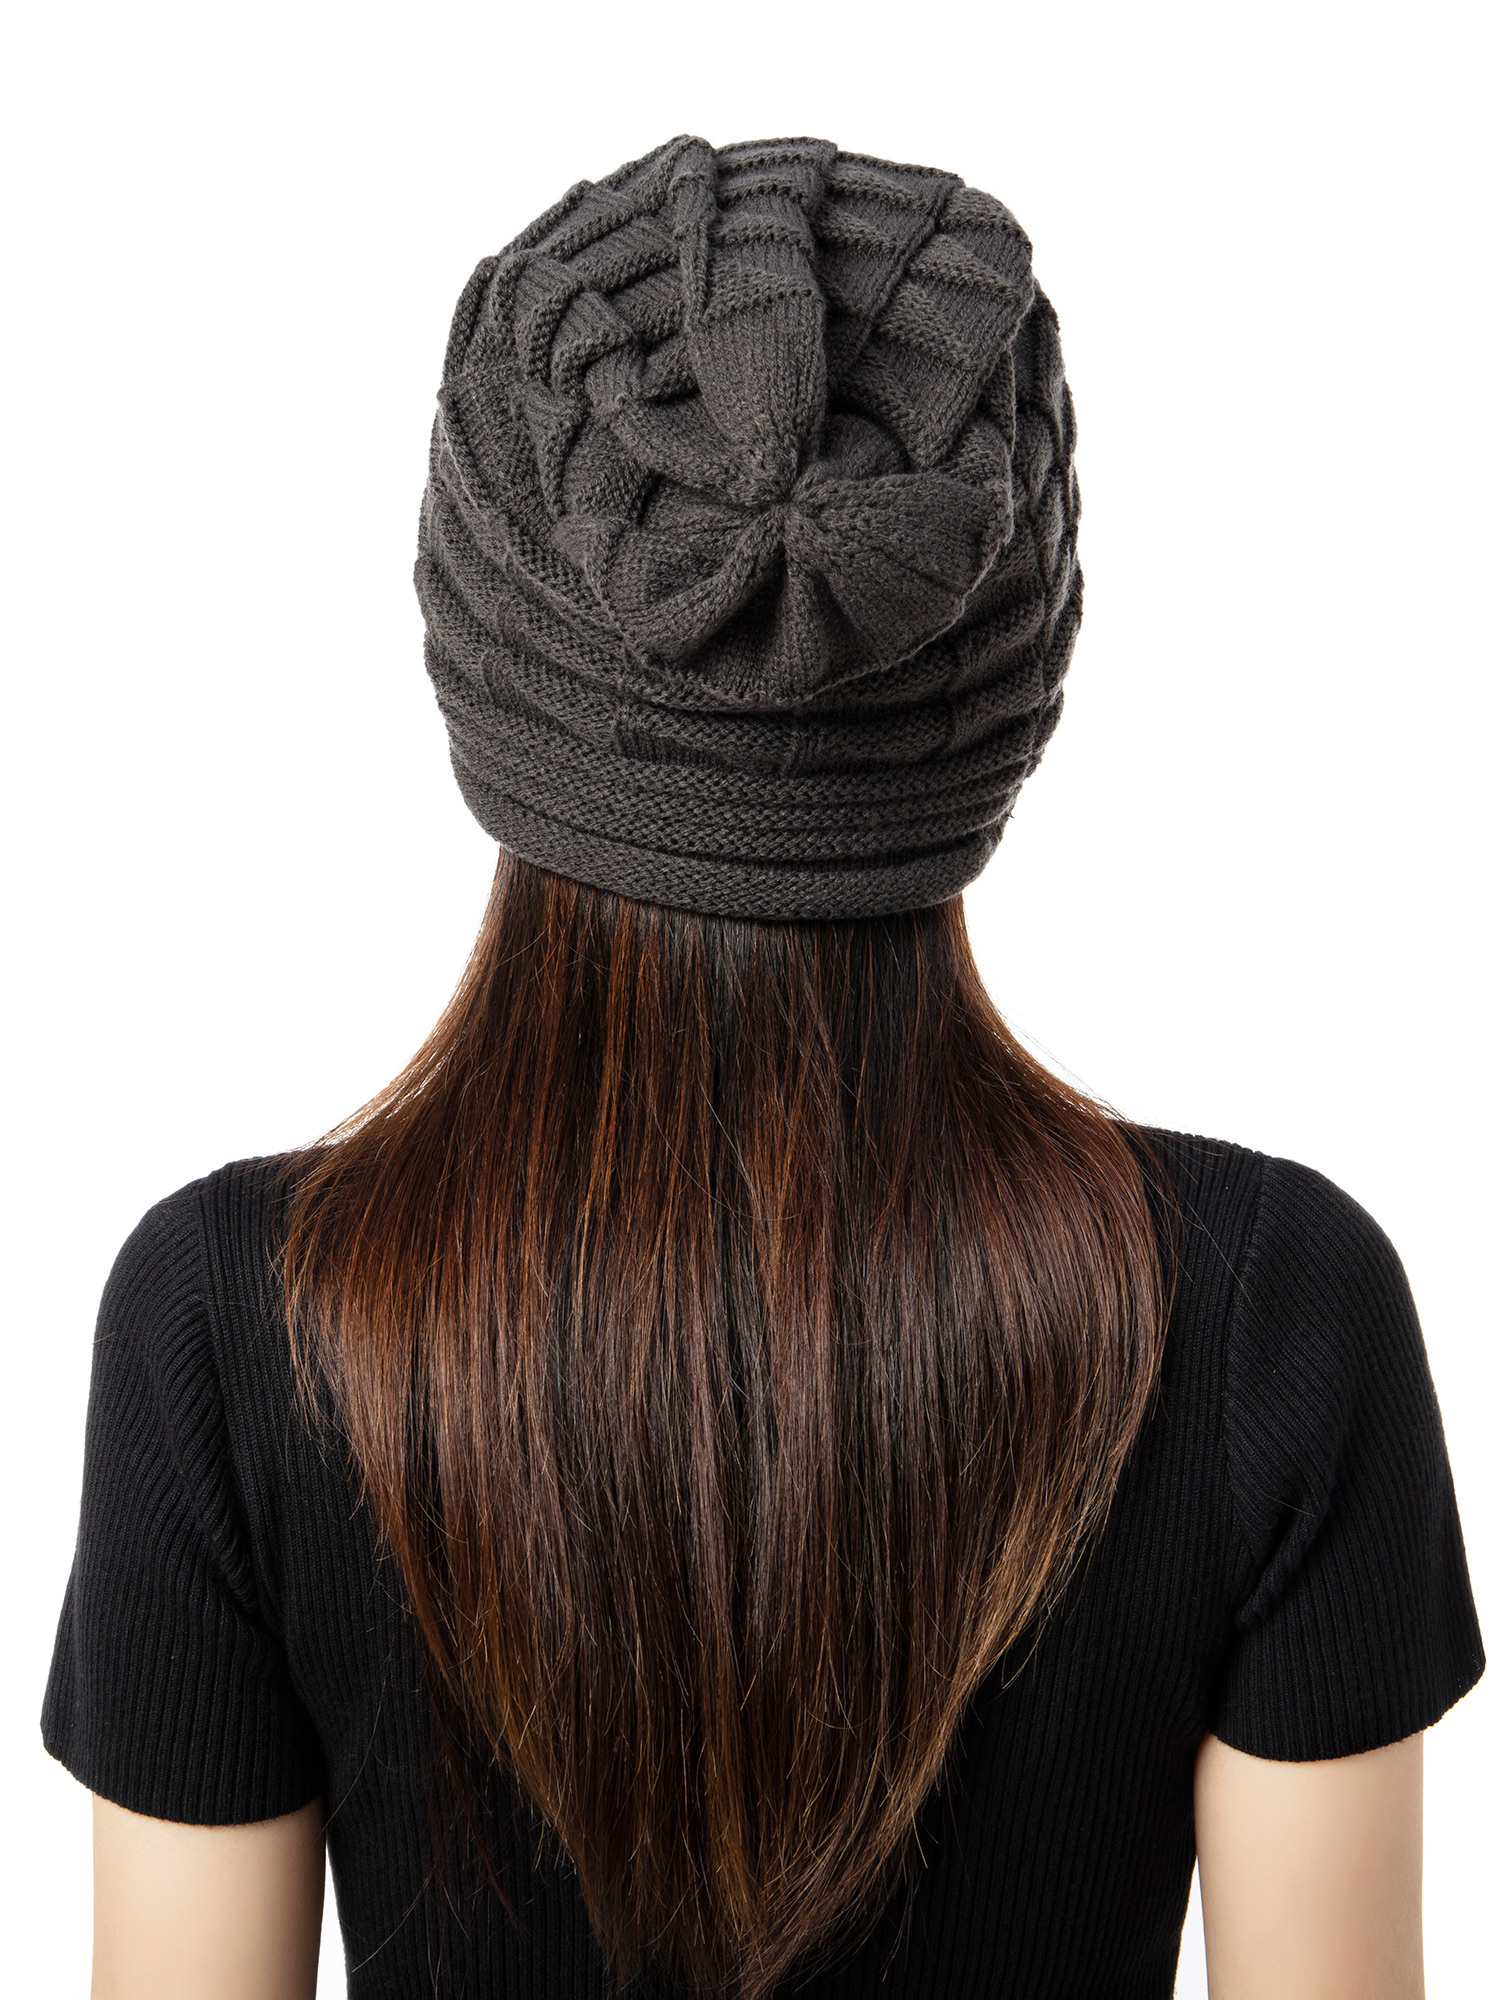 SAYFUT Girls Winter Beanie Hats Warm Knit Hat Thick Knit Skull Cap Oversize Baggy Slouchy Beanie Warm Winter Hat Stocking Cap For Women - image 3 of 8